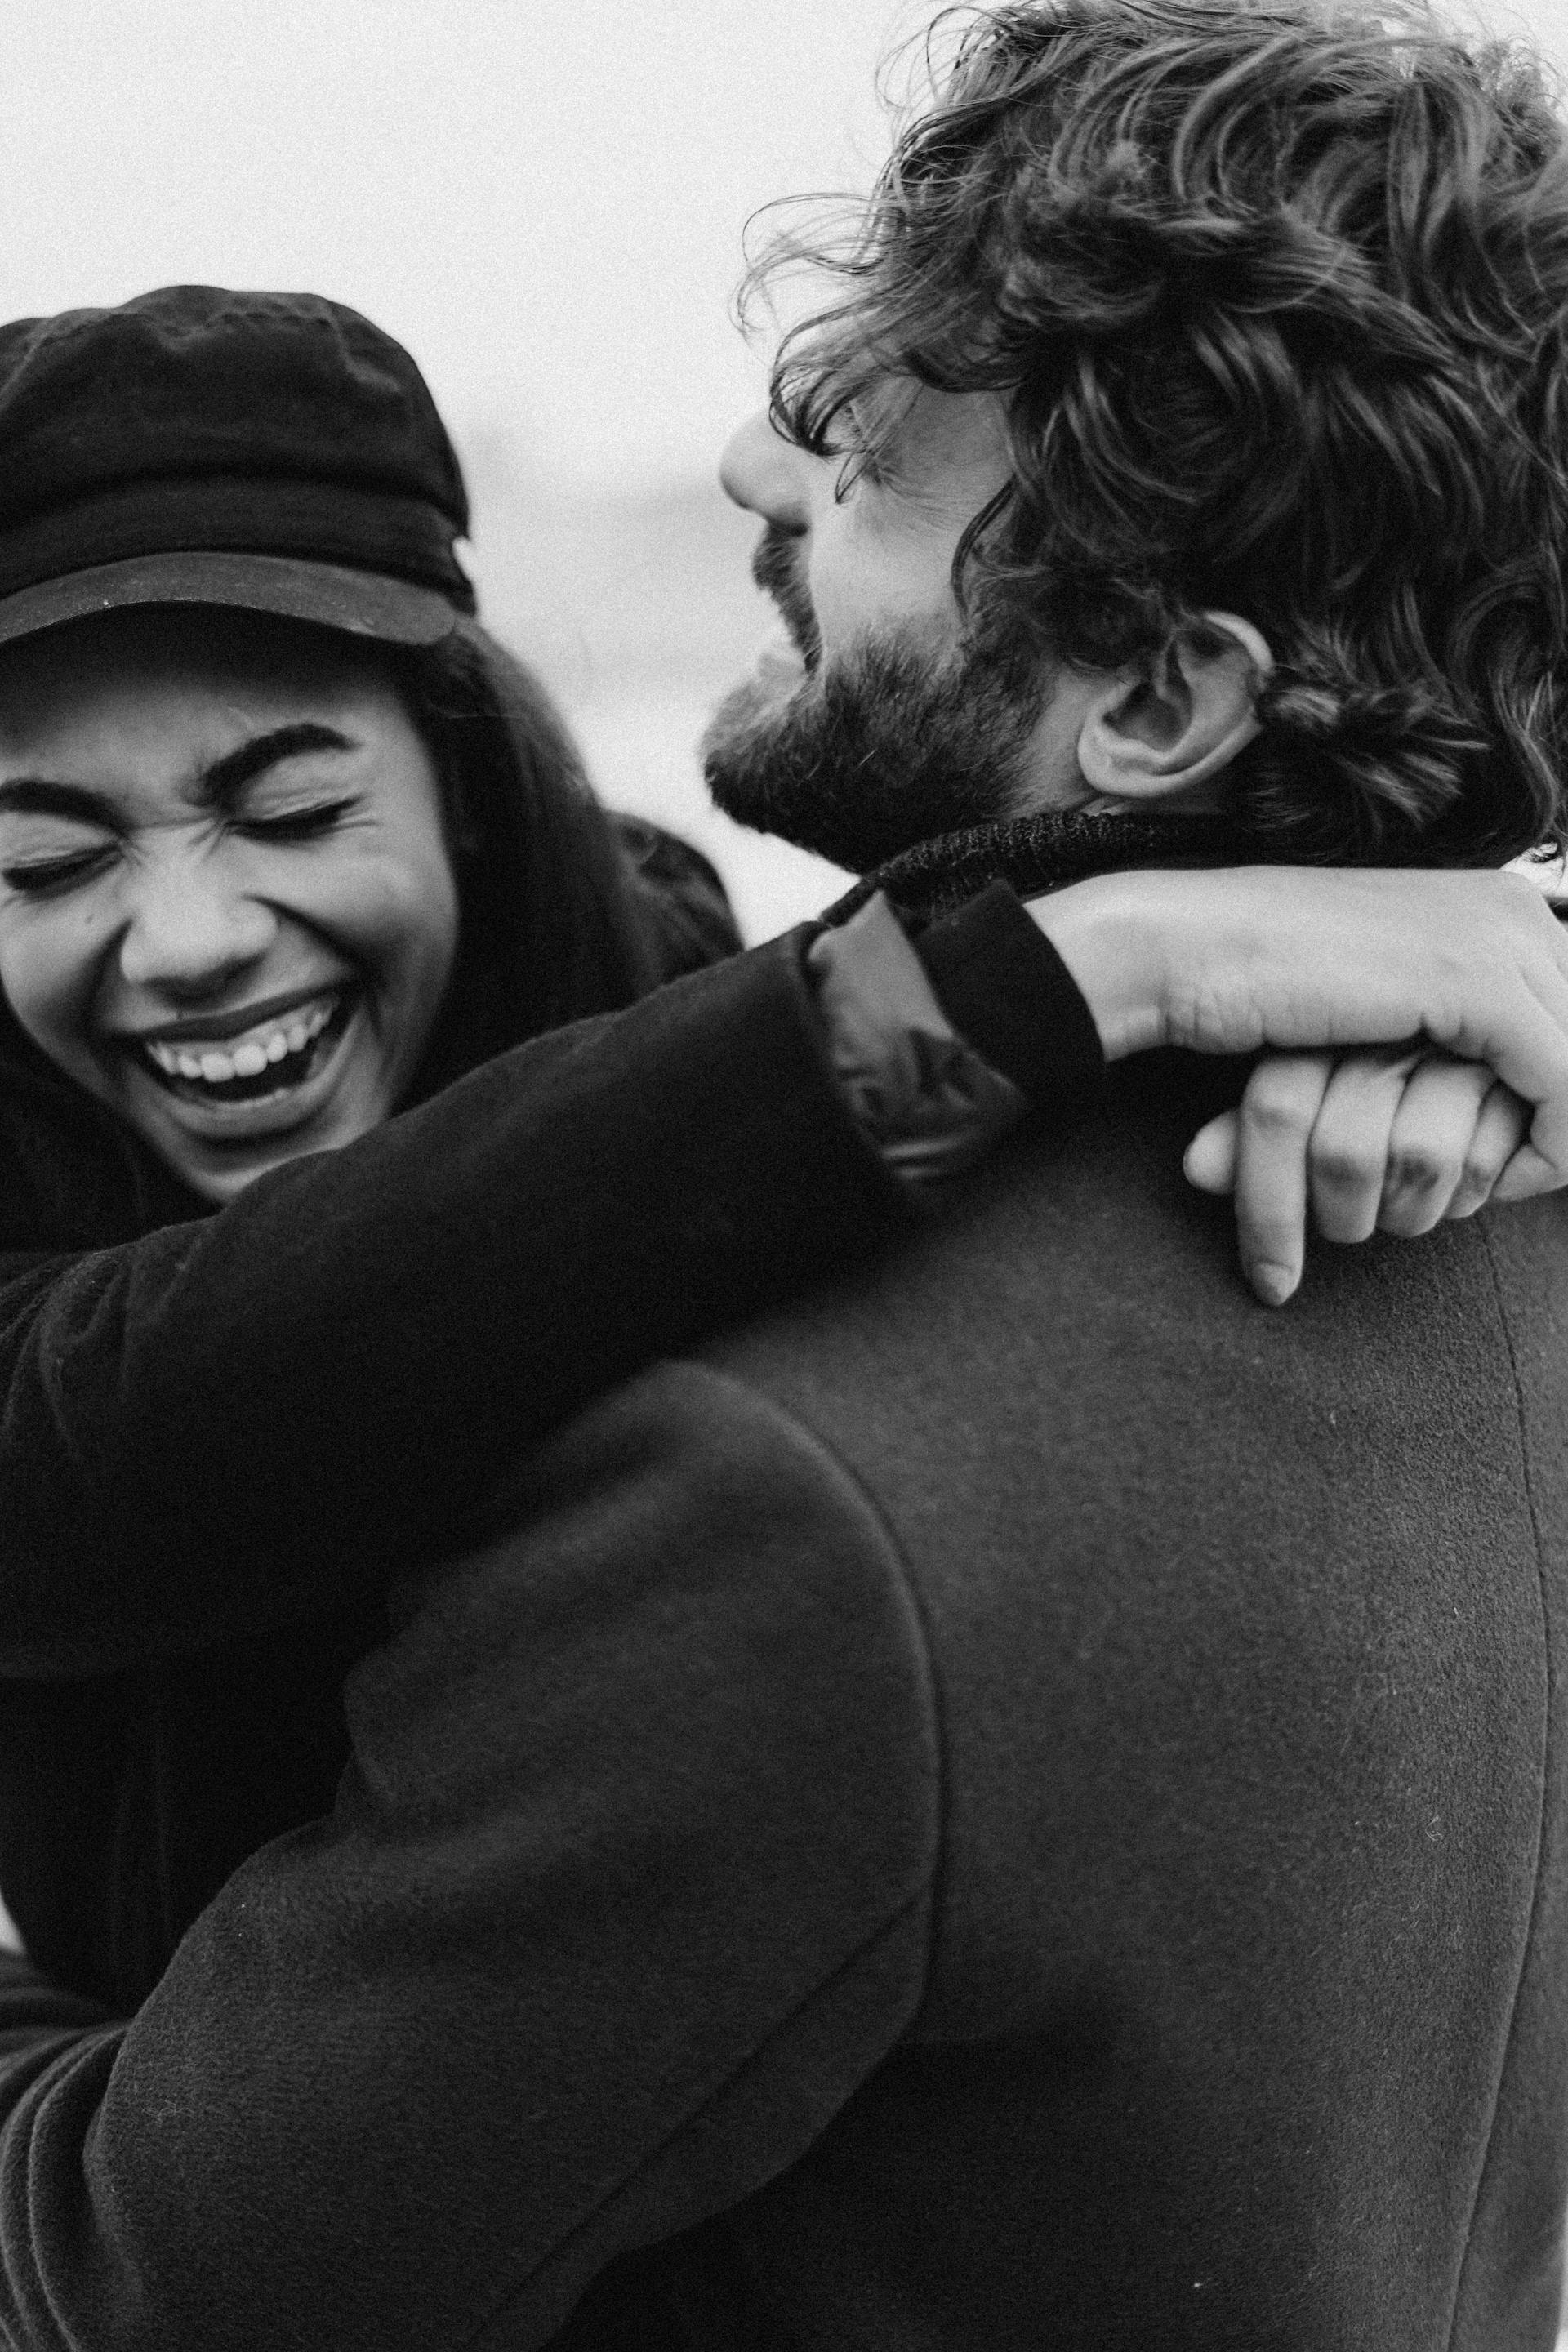 A monochrome photo of a couple laughing | Source: Pexels